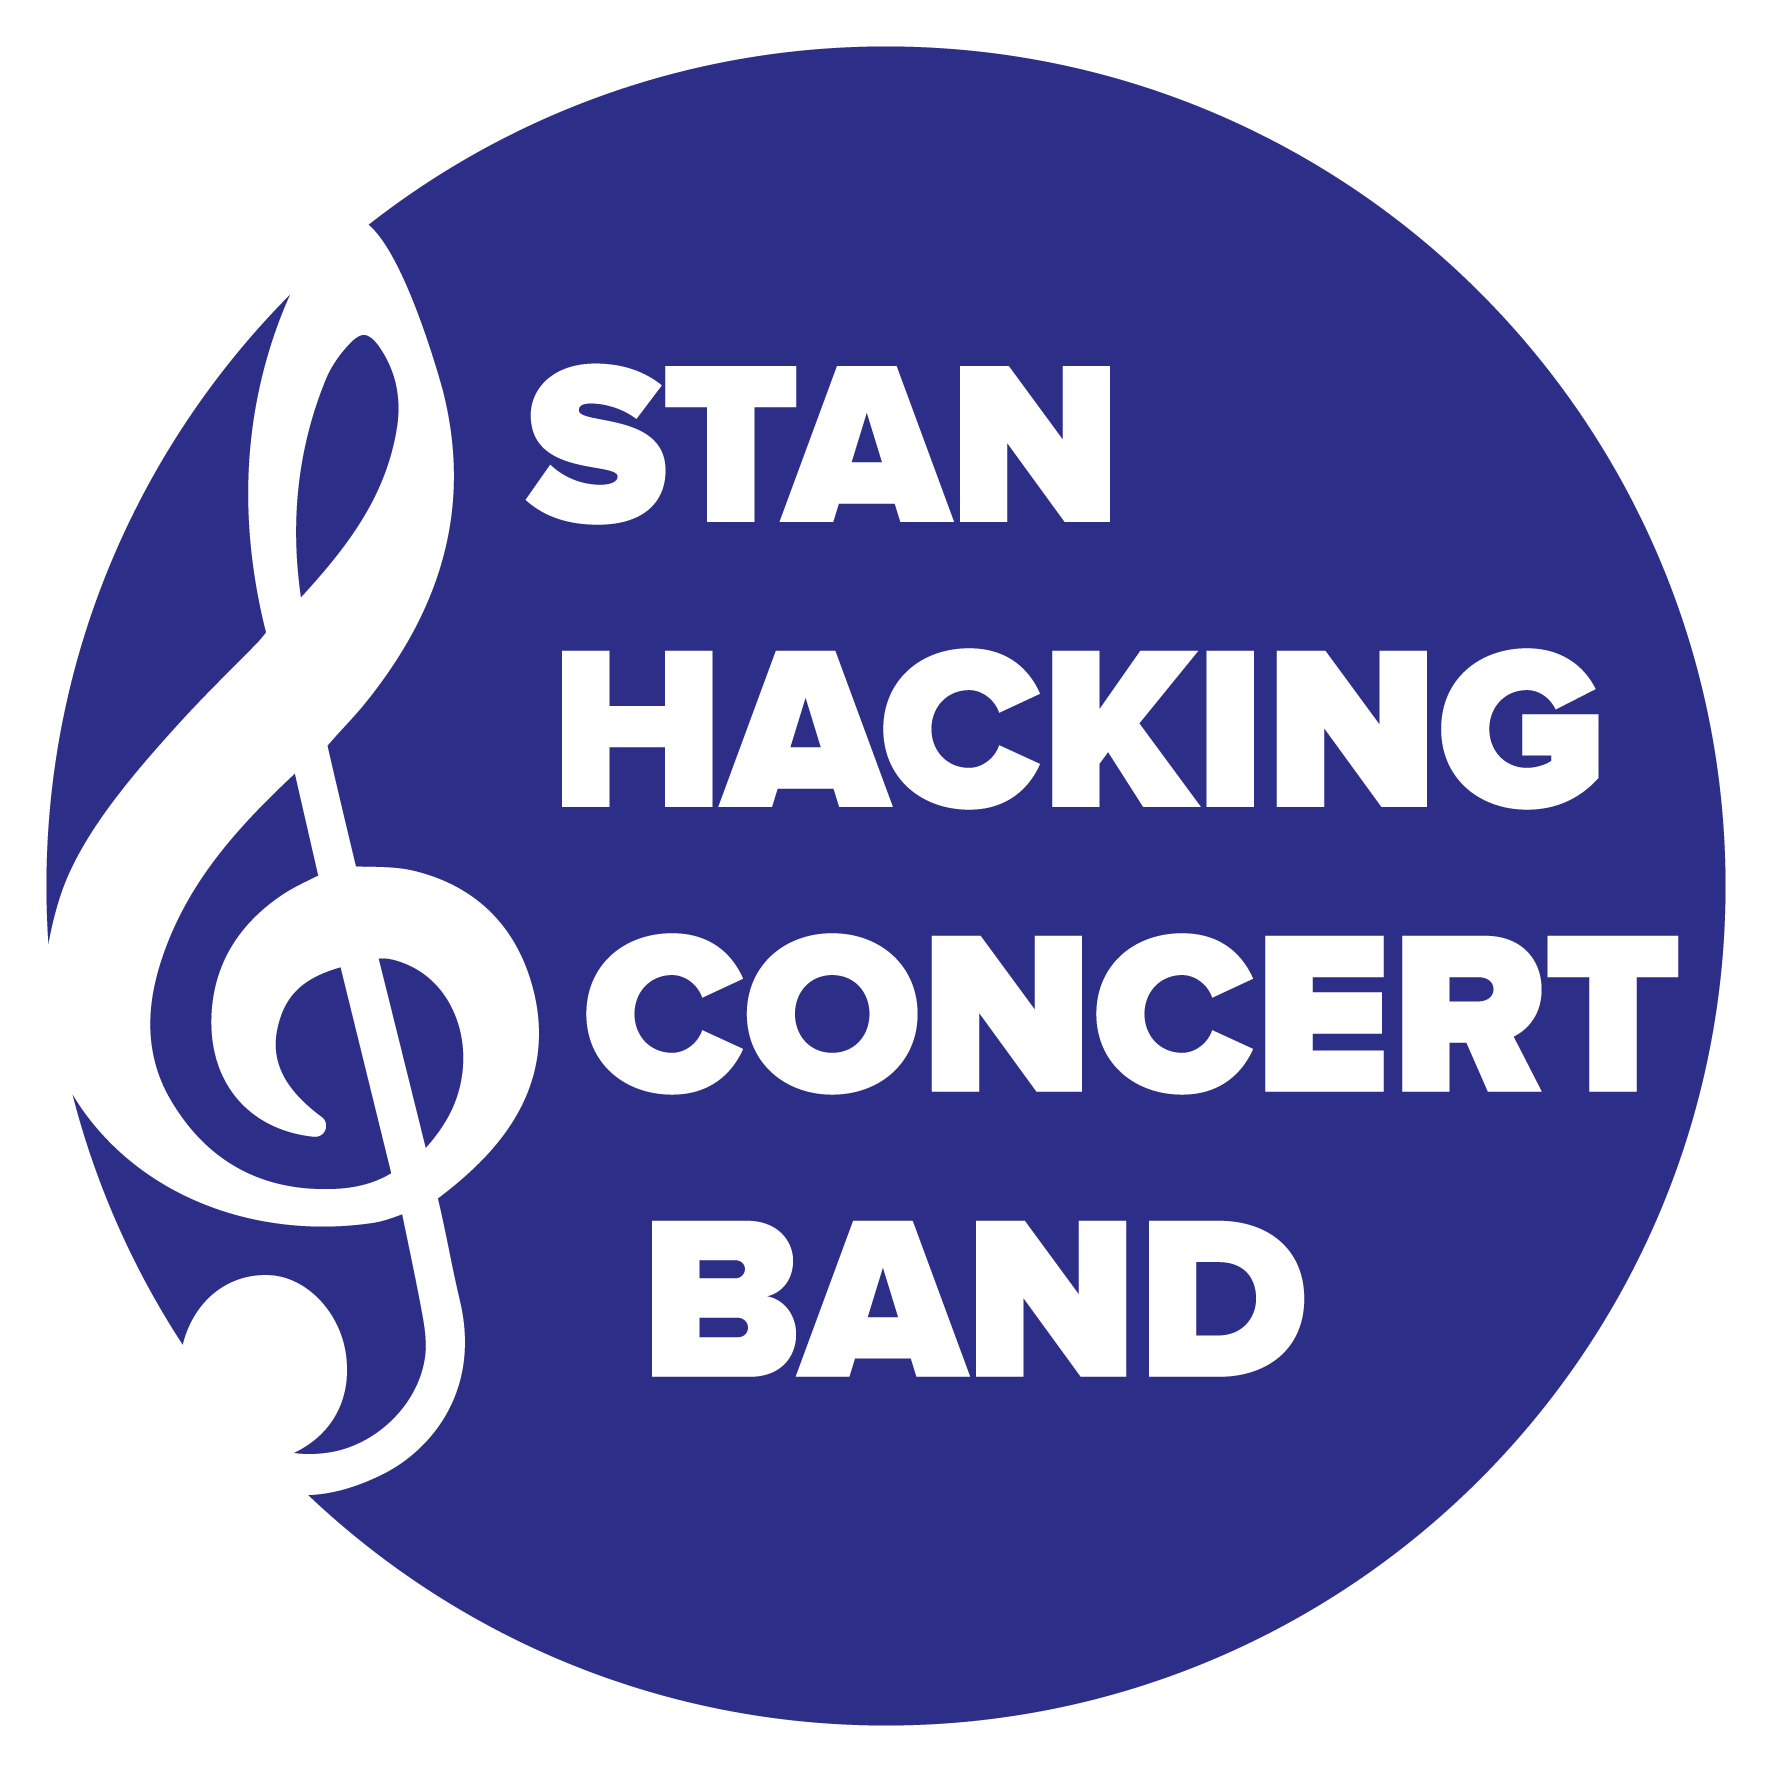 The Stan Hacking Concert Band